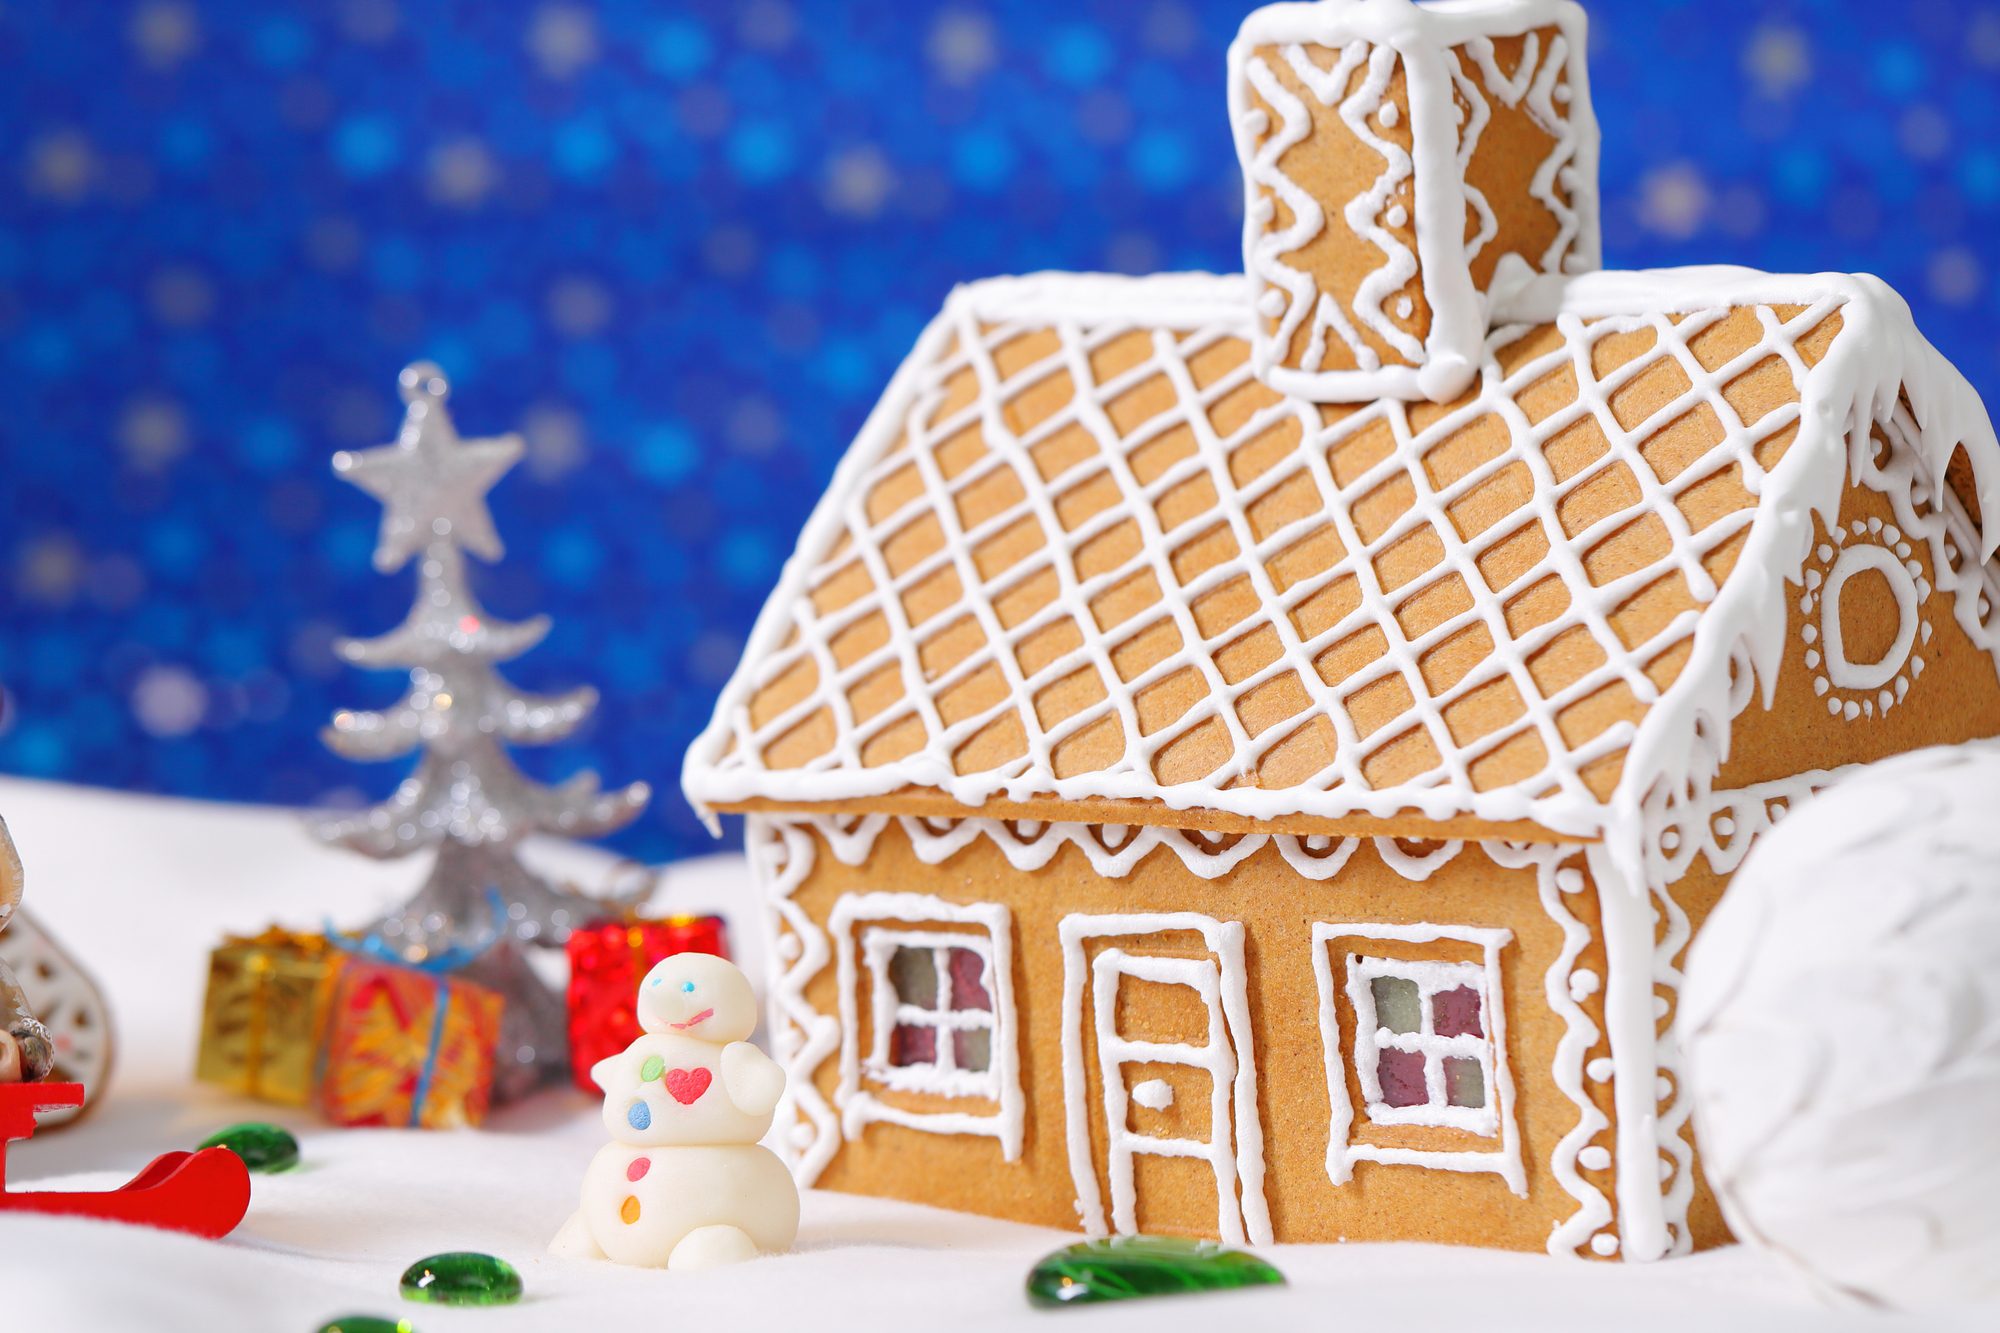 Christmas card with gingerbread house and tree with decorations